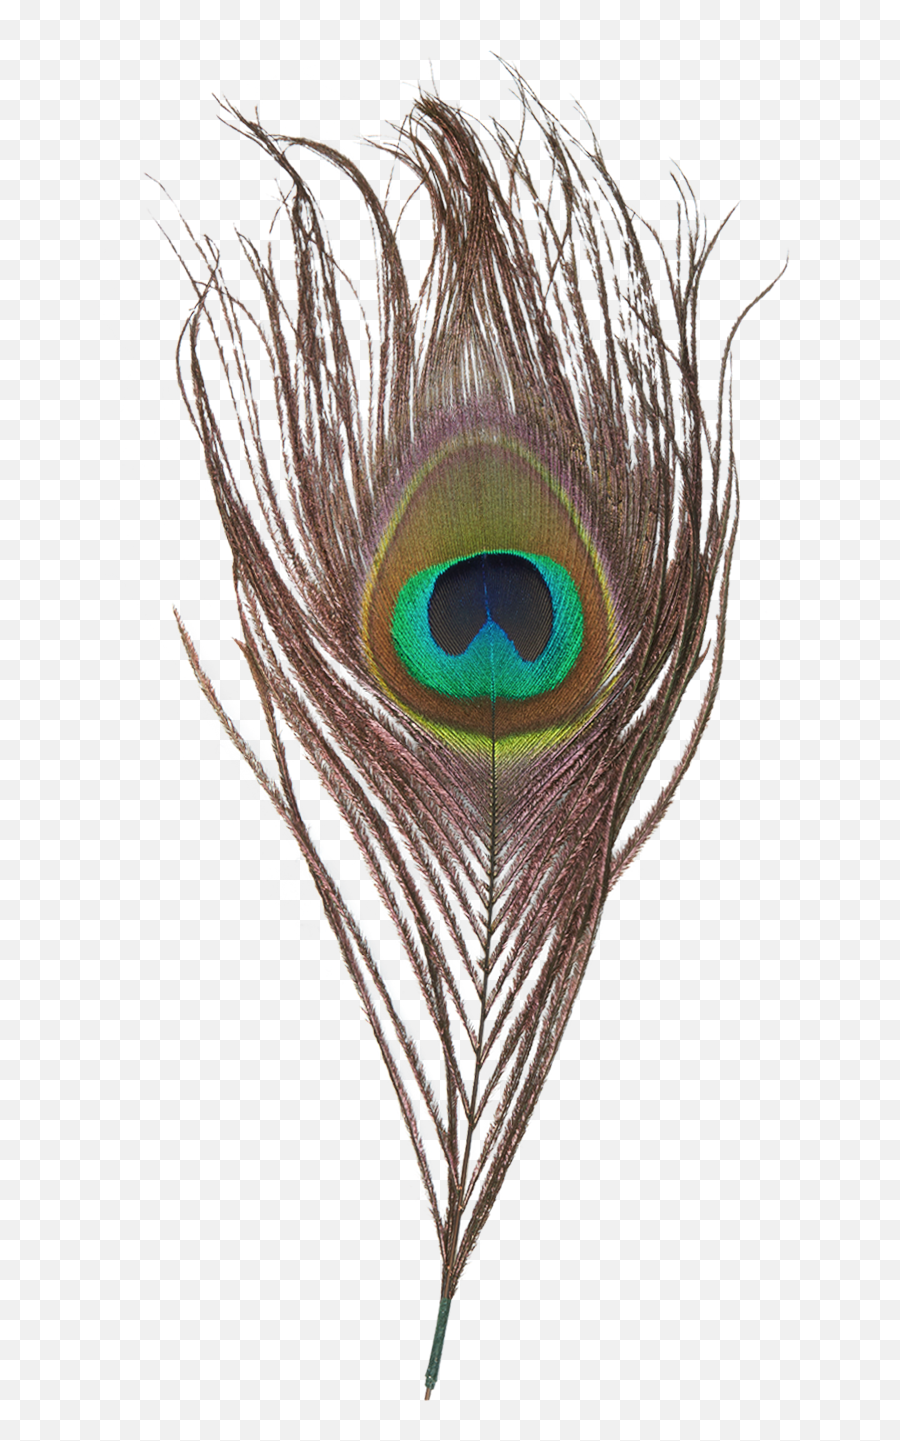 Download Hd Peacock Feather Png - Krishna Mor Pankh Png Emoji,Peacock Feather Ascii Emoticon